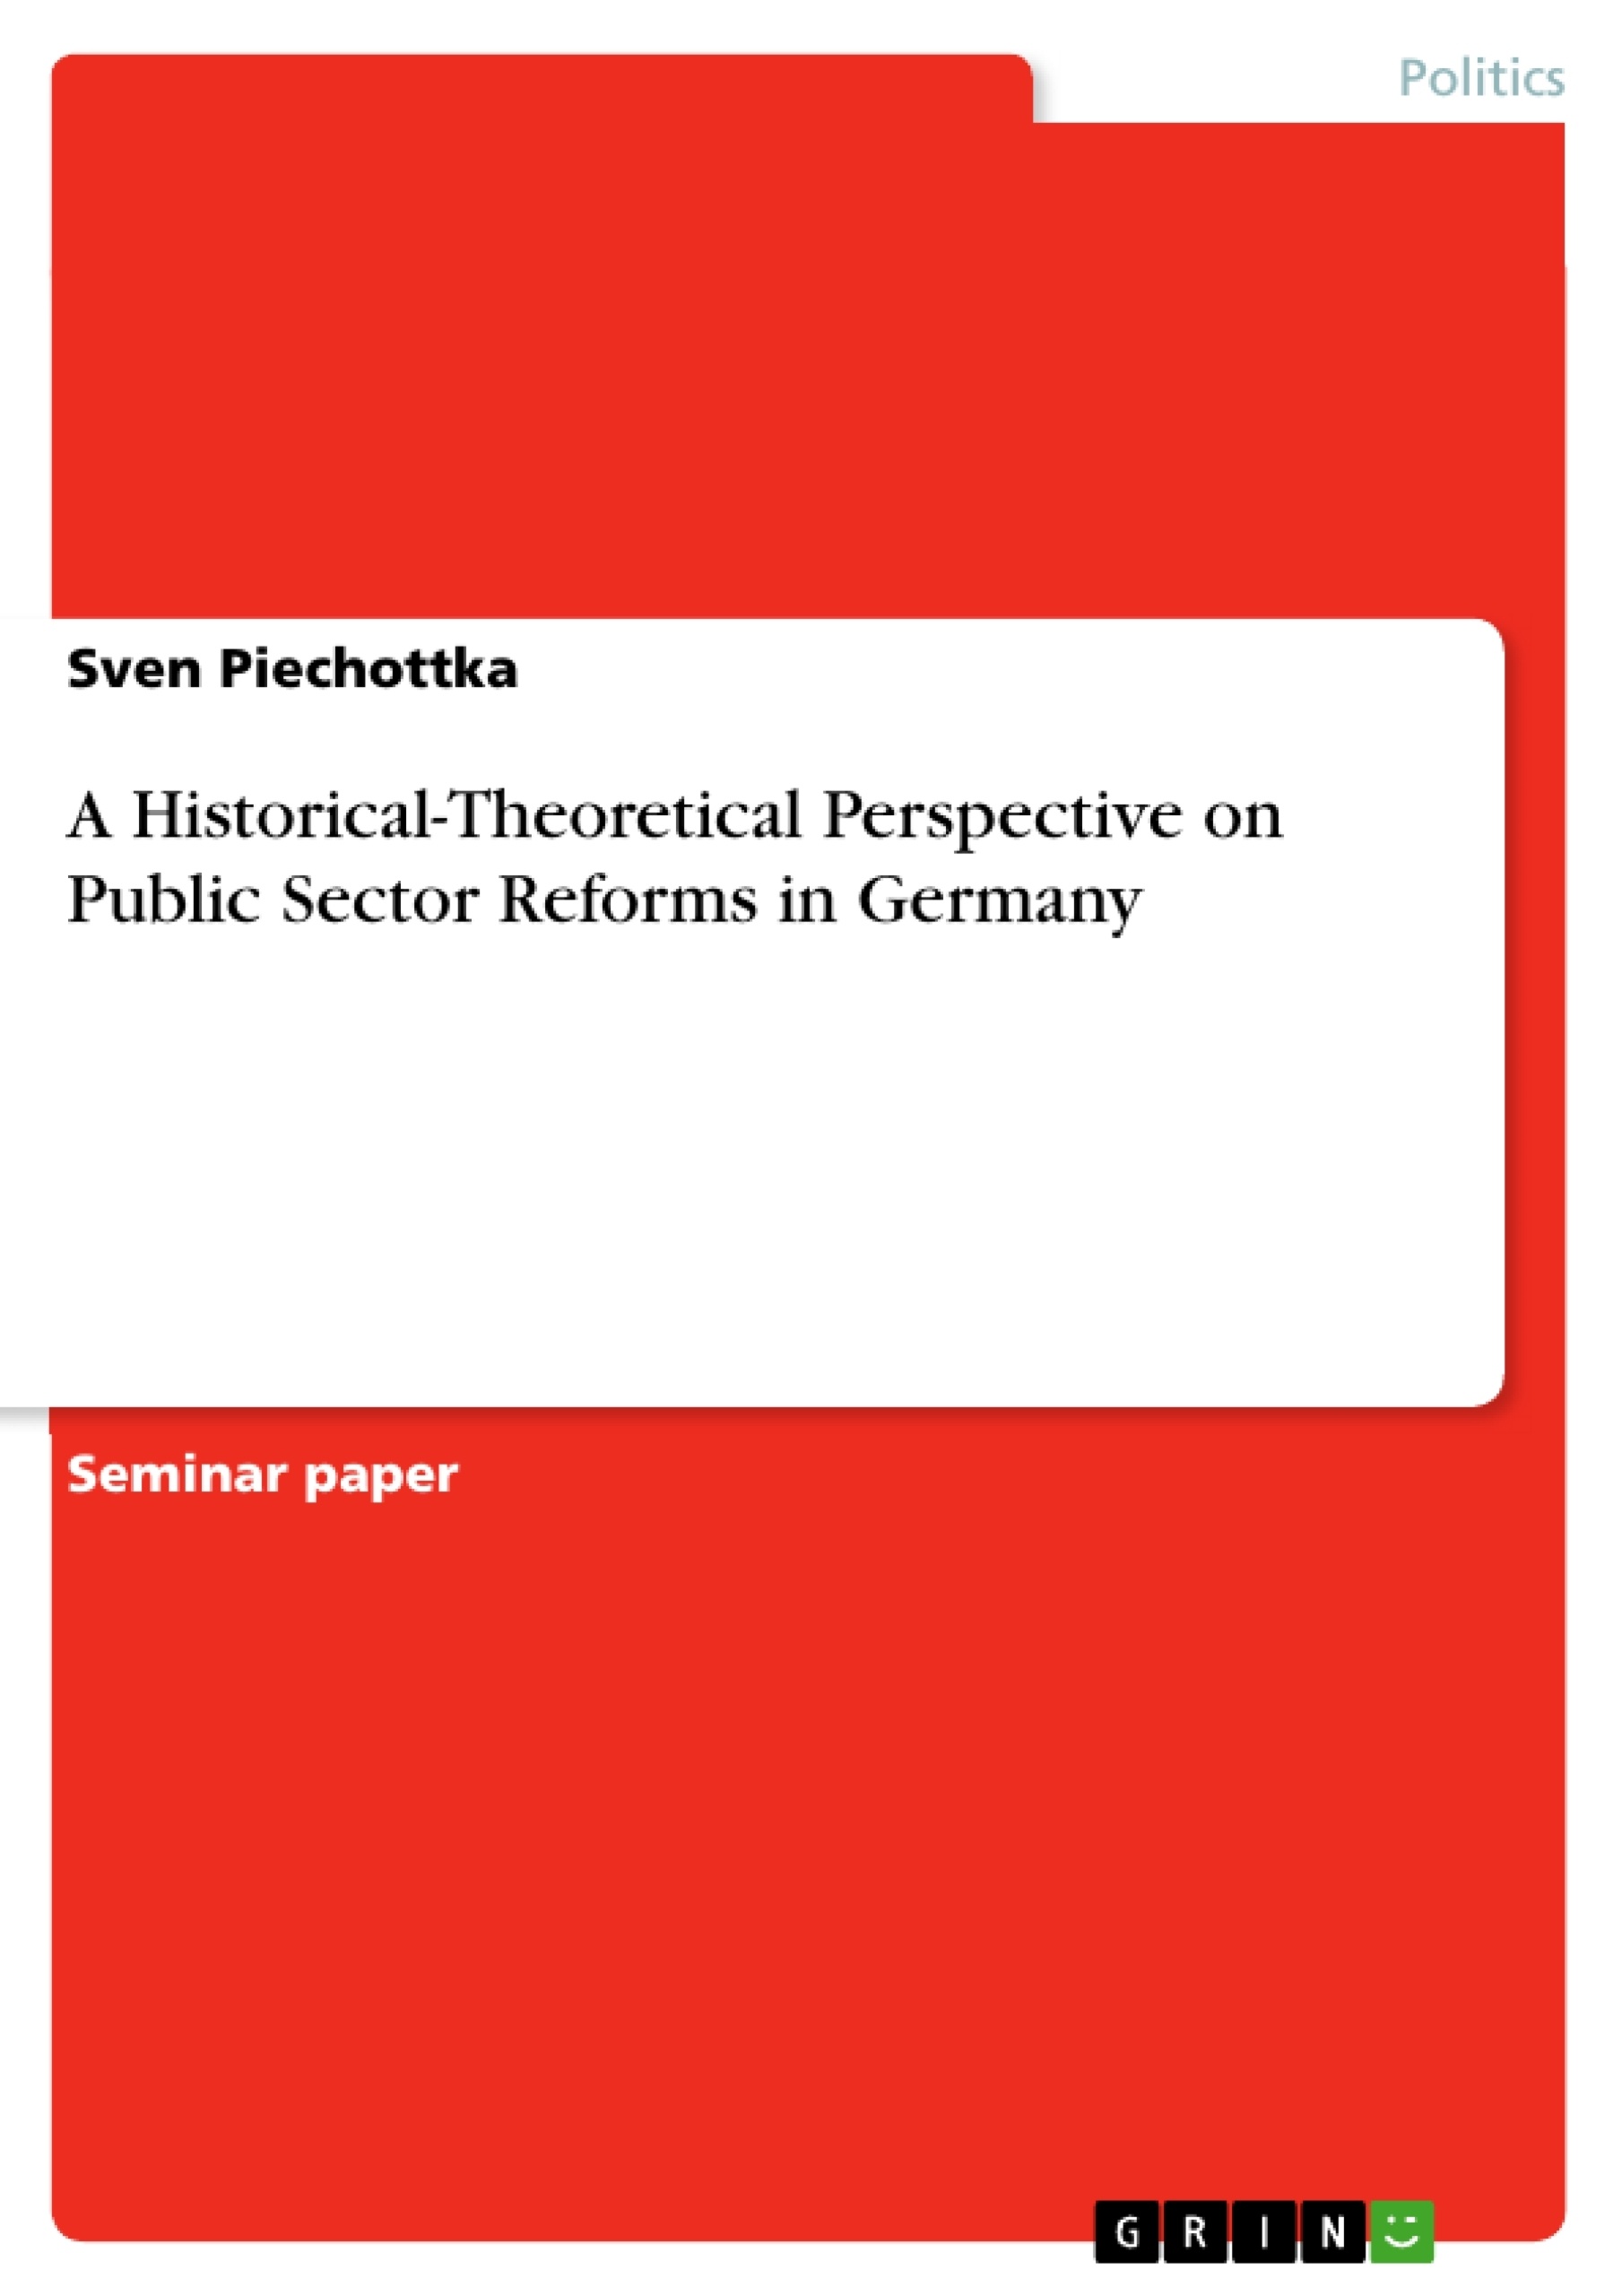 Title: A Historical-Theoretical Perspective on Public Sector Reforms in Germany